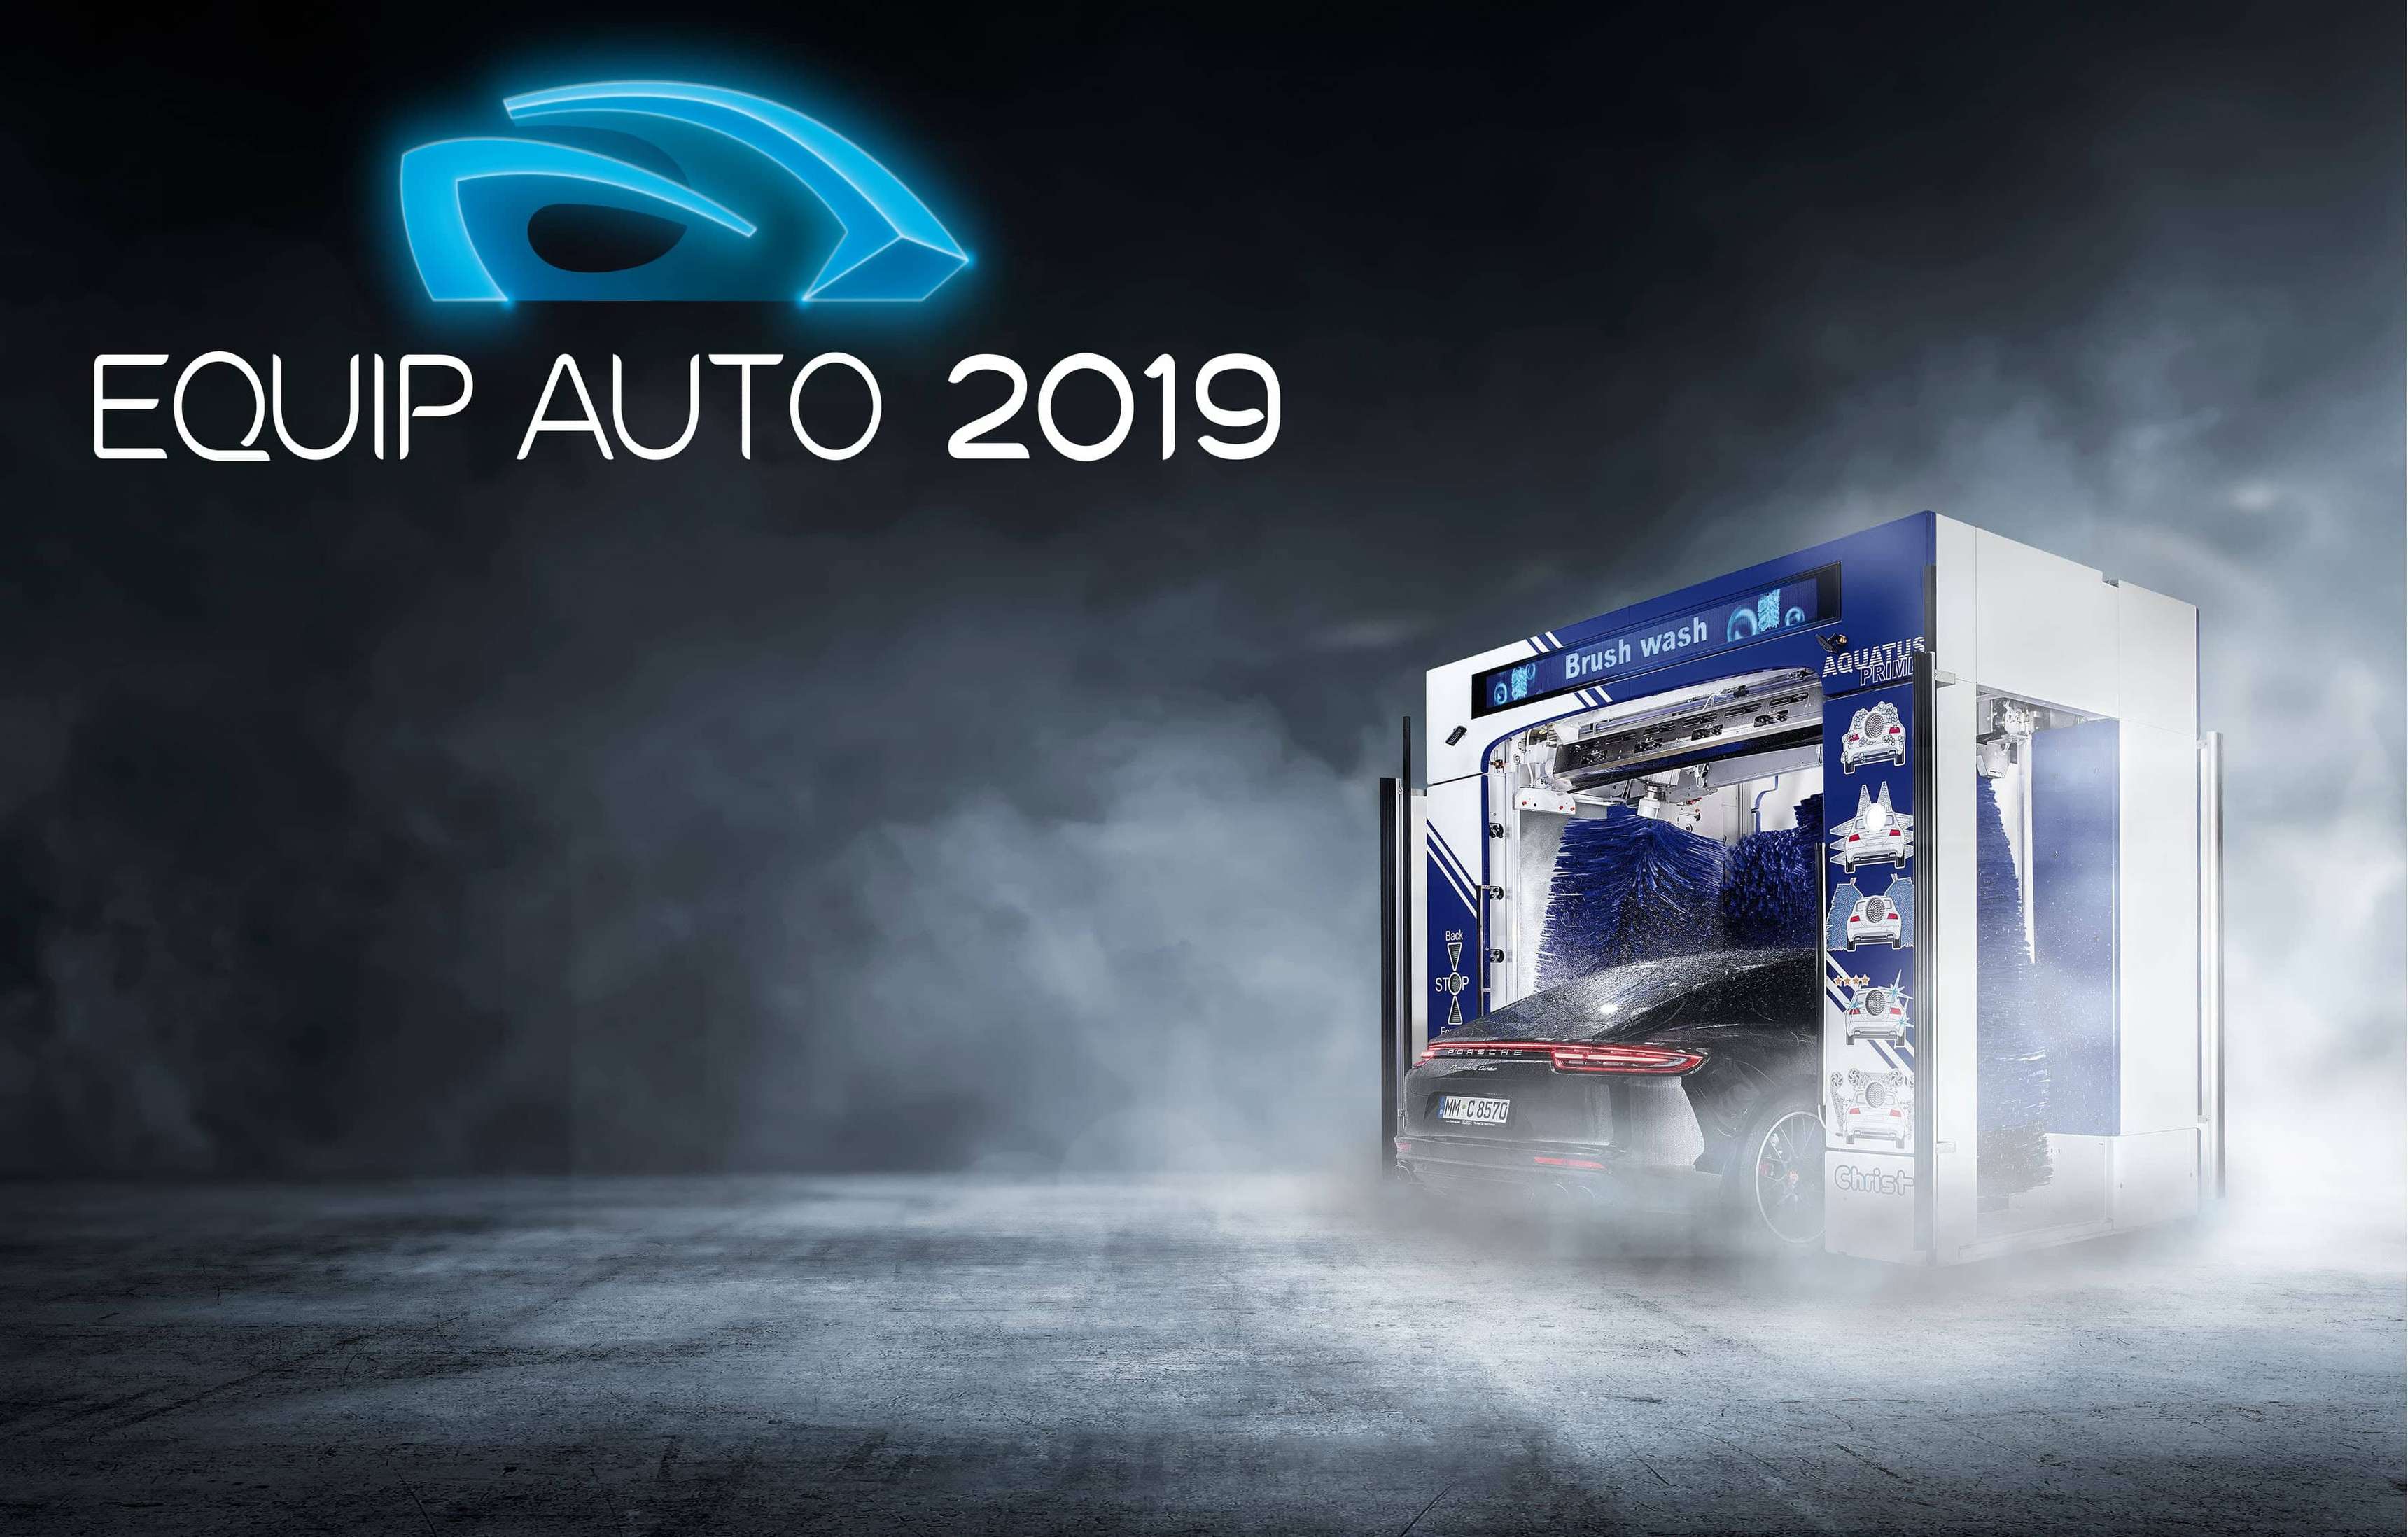 We're looking forward to the EQUIP AUTO trade fair on 15.-19.10.2019